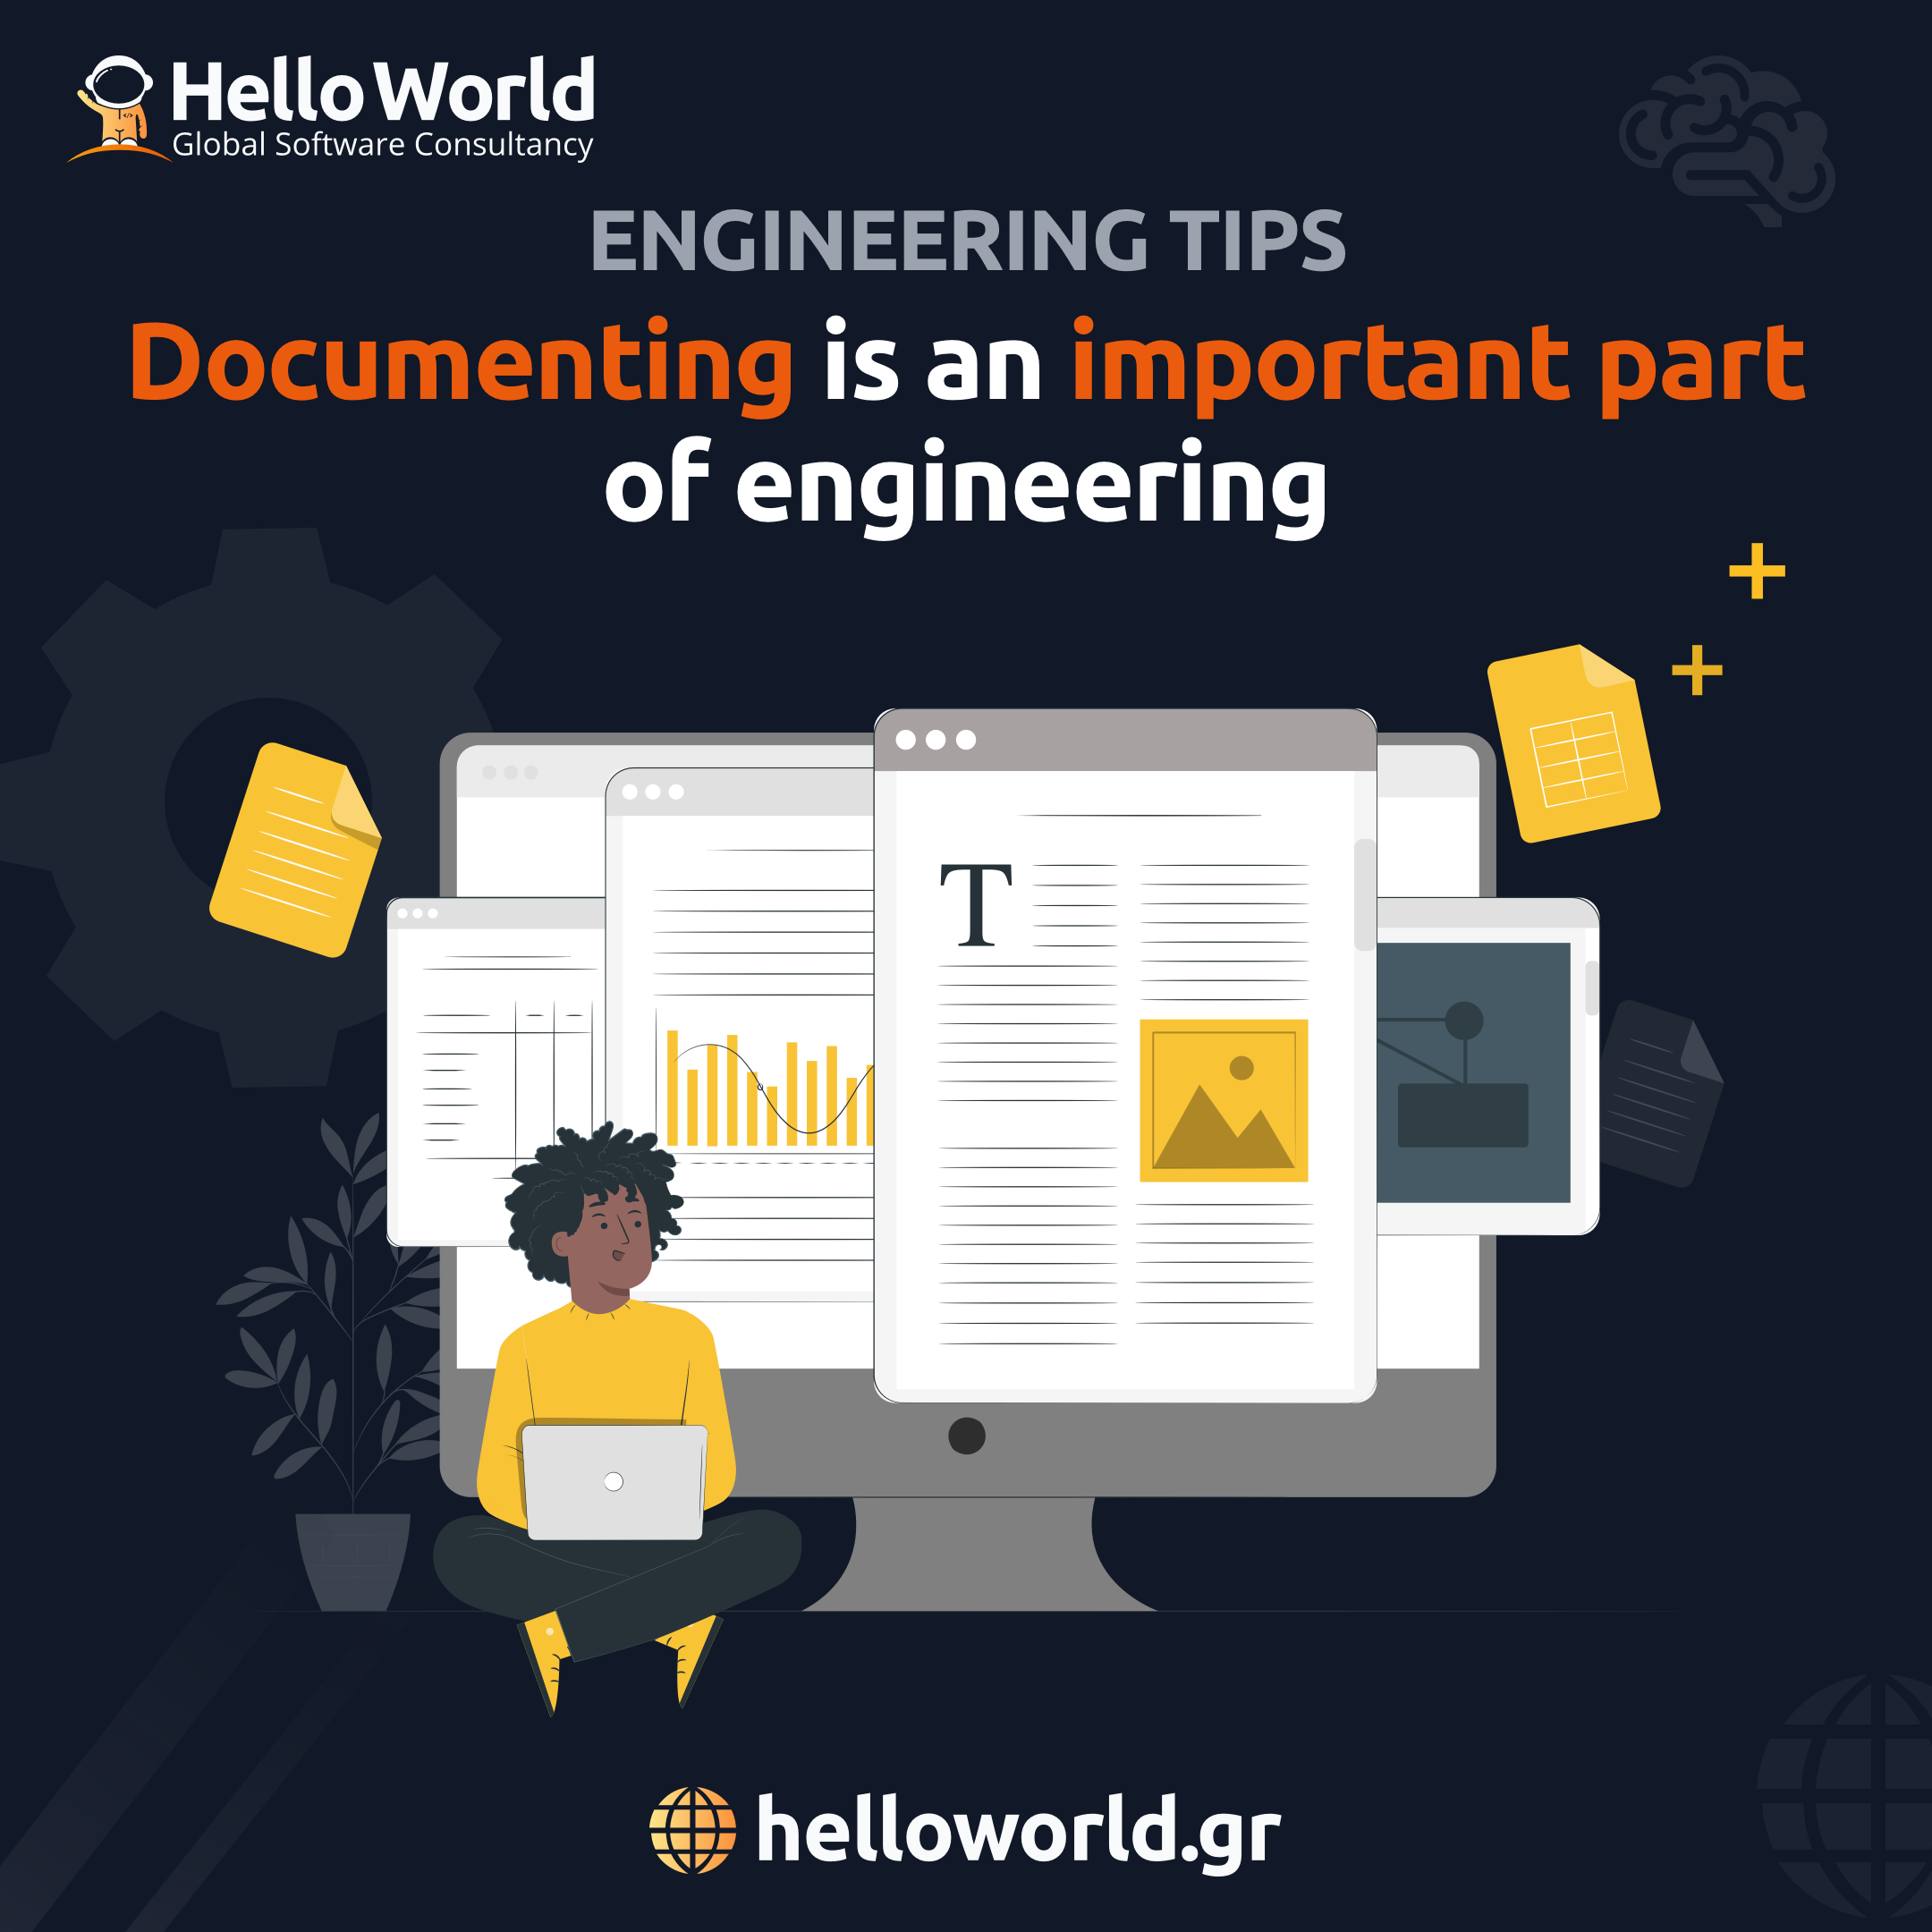 Documenting is an important part of engineering